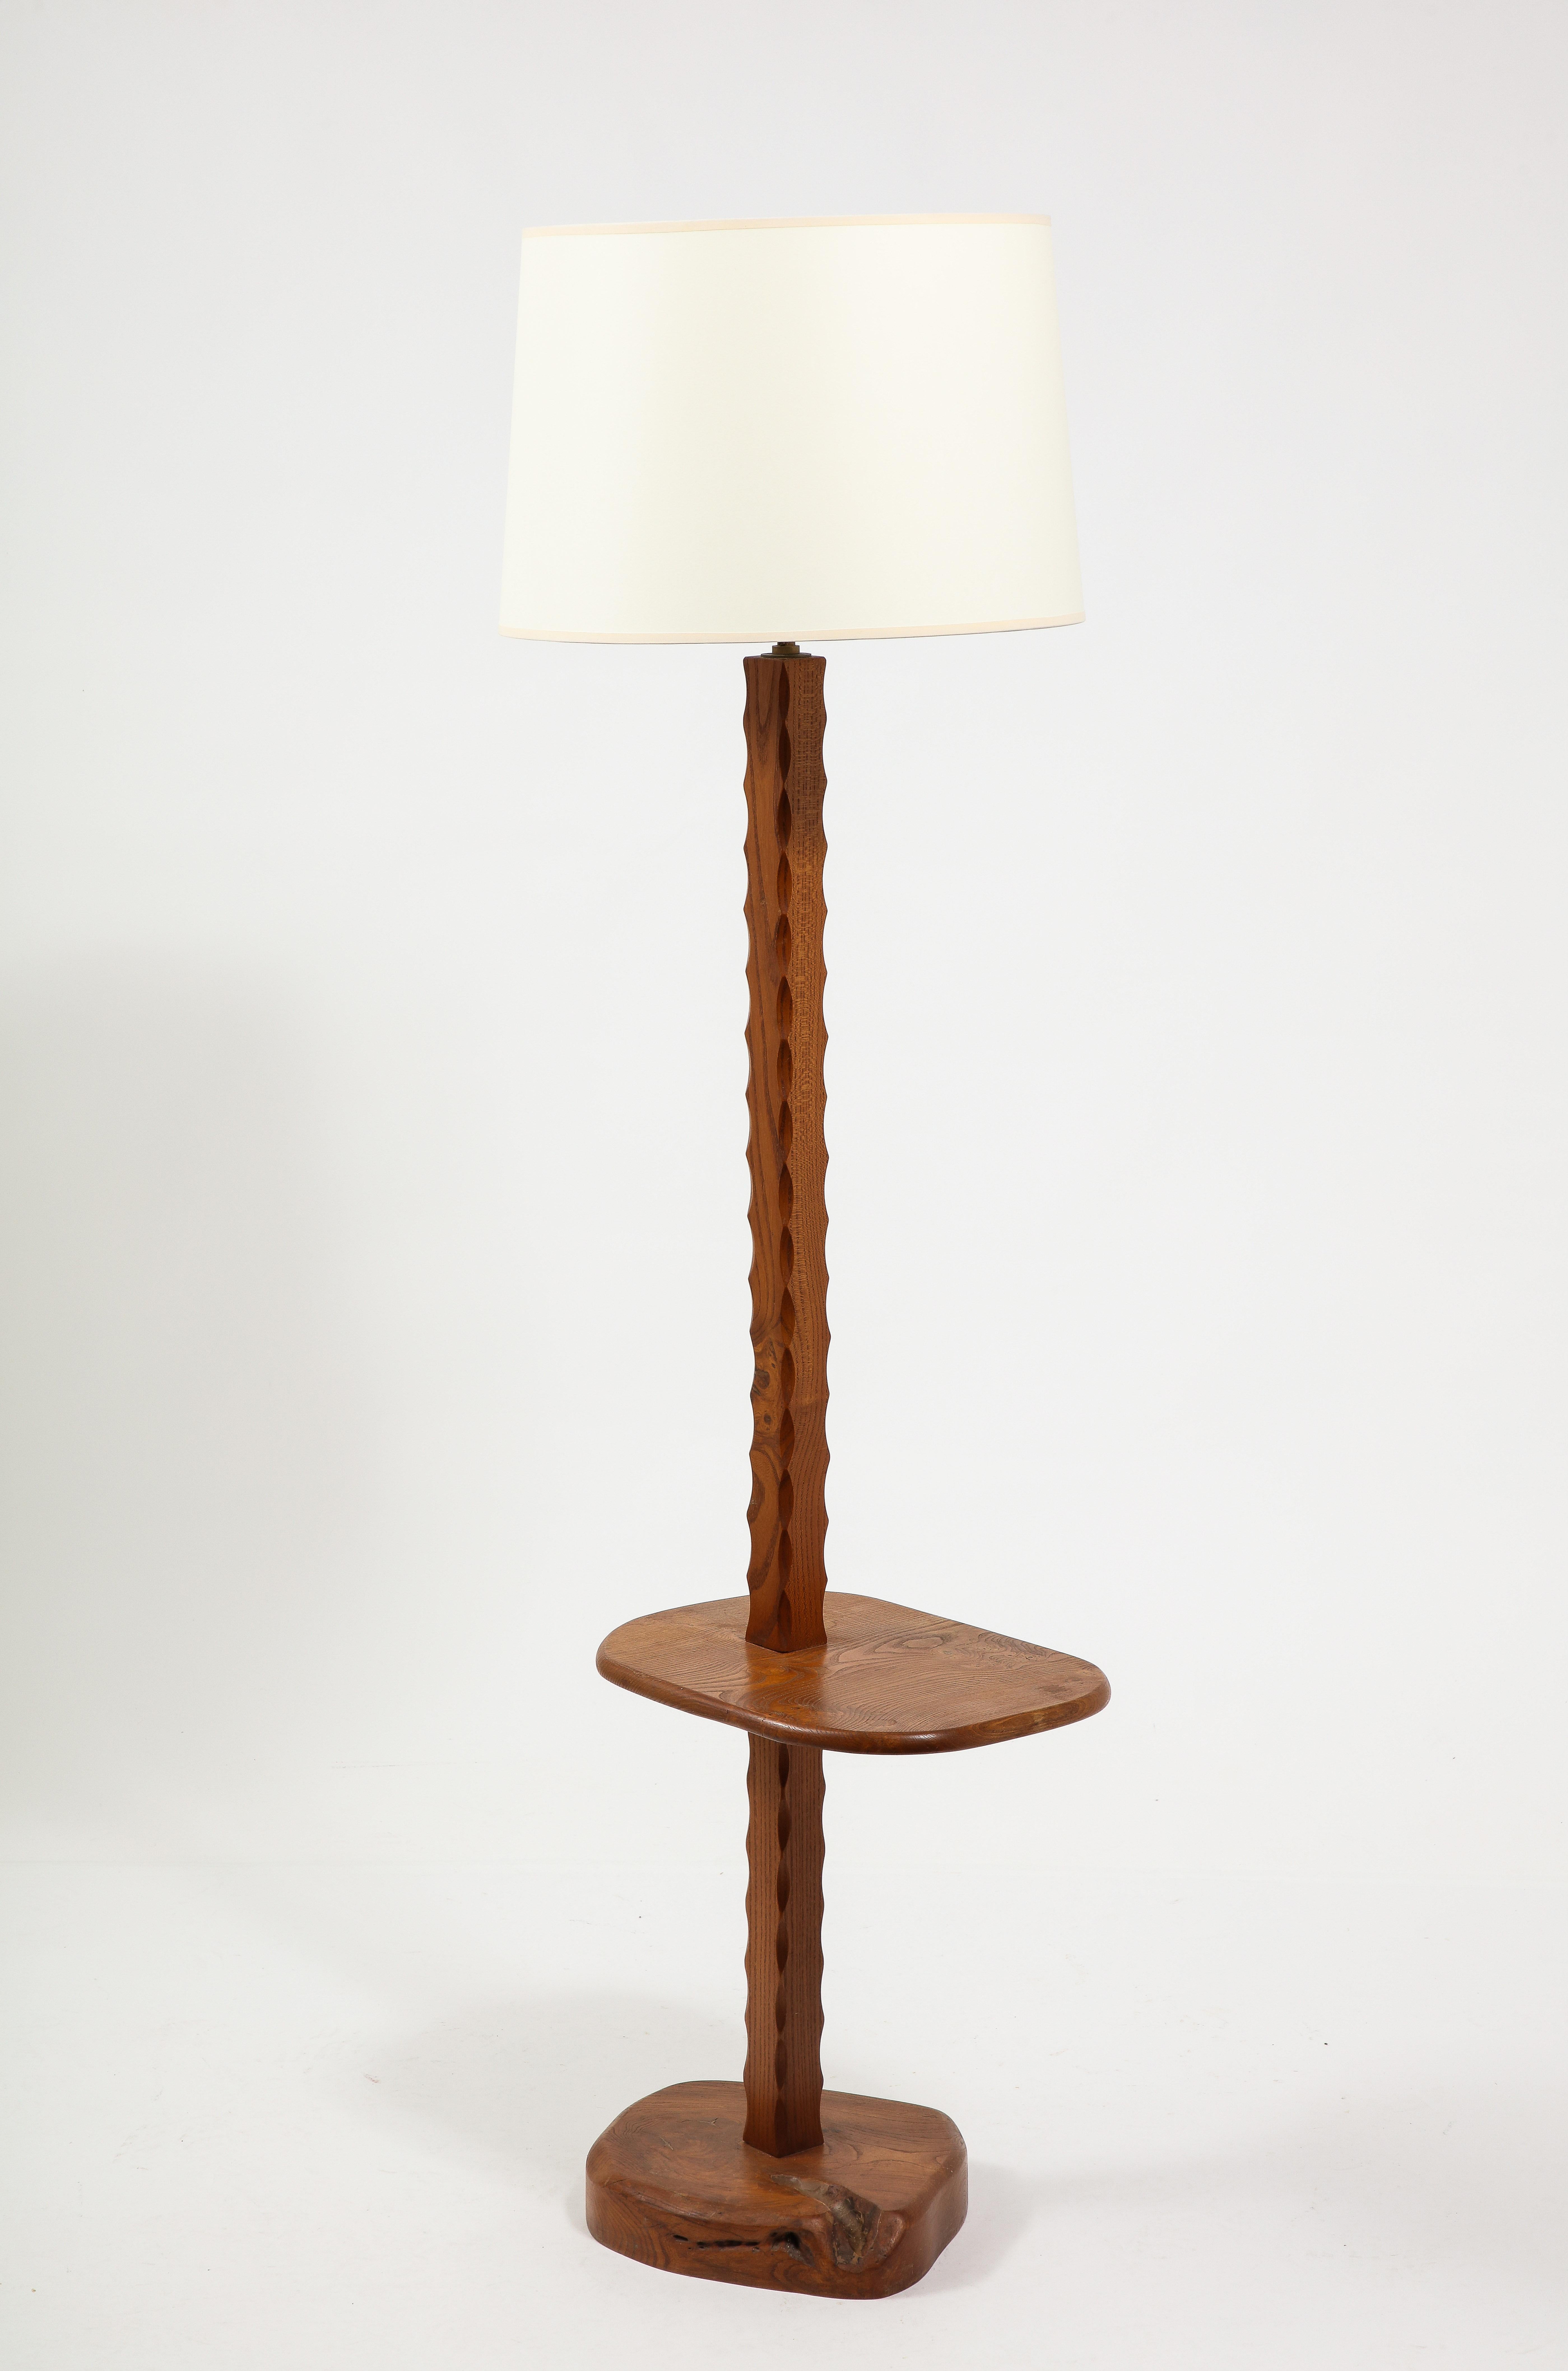 Solid Elm floor lamp with a shelf, with a carved motif on the stem.
